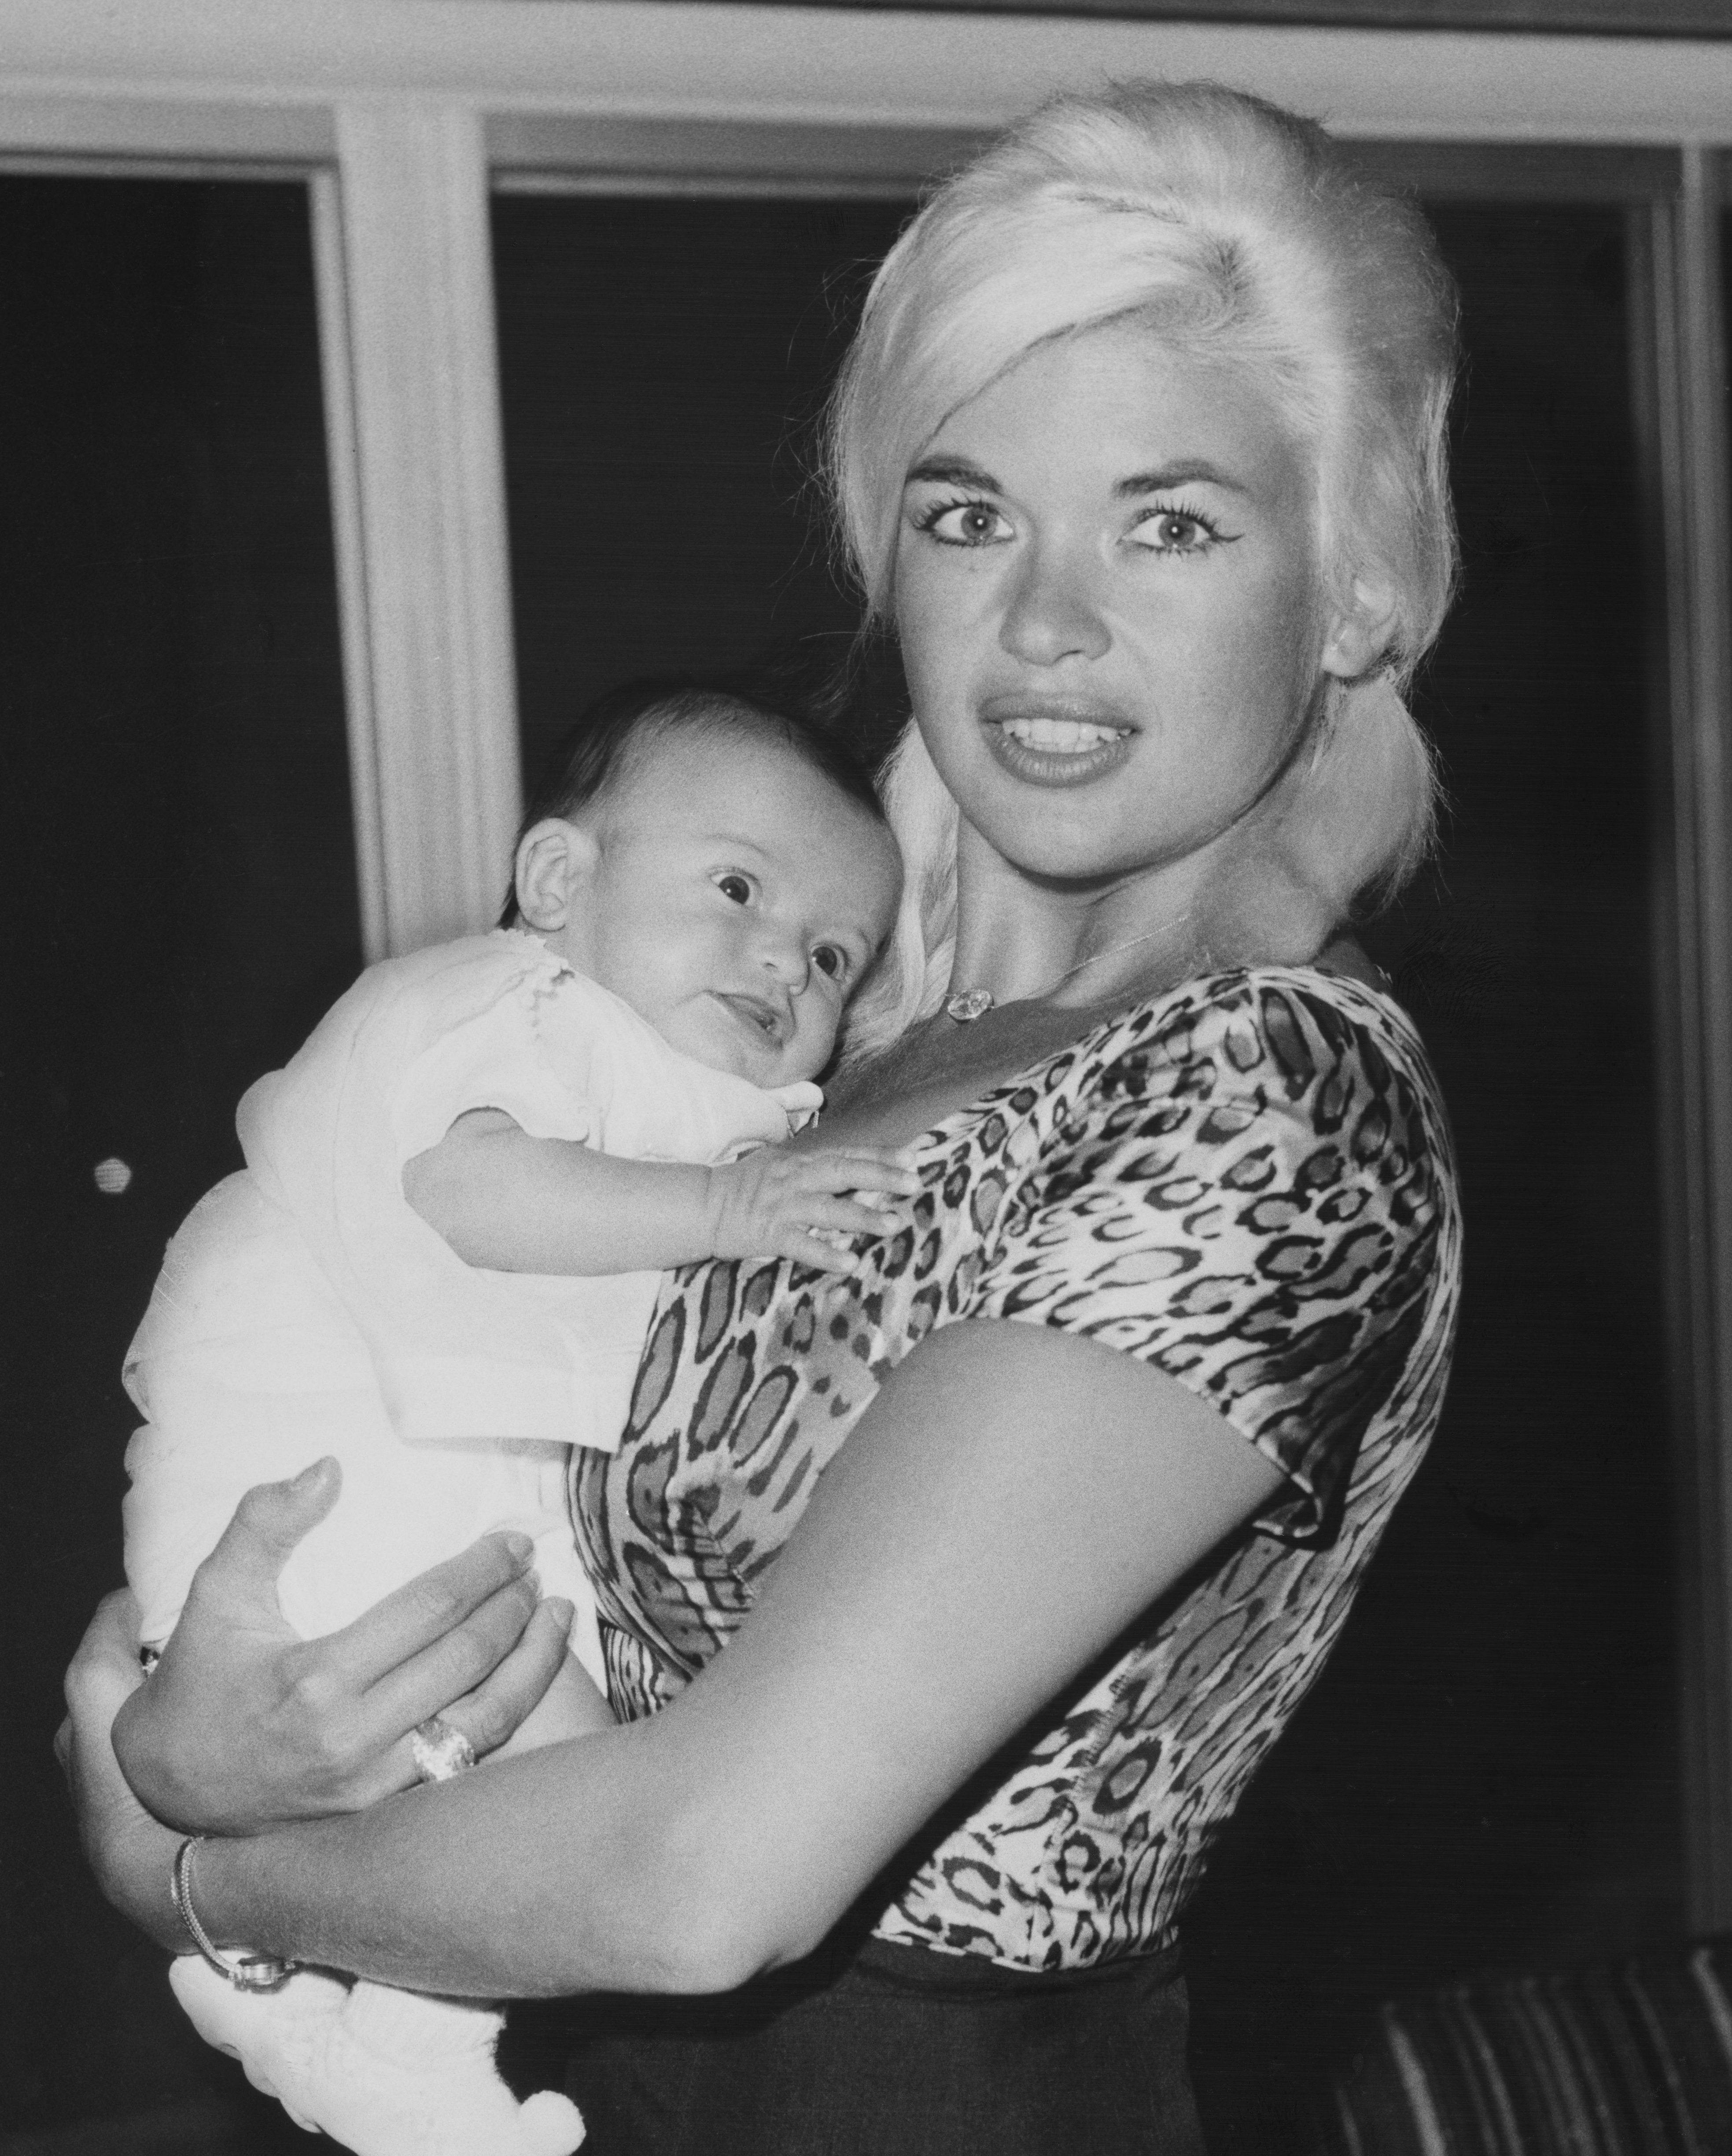 Jayne Mansfield and Mariska Hargitay in the US on March 1964 | Source: Getty Images